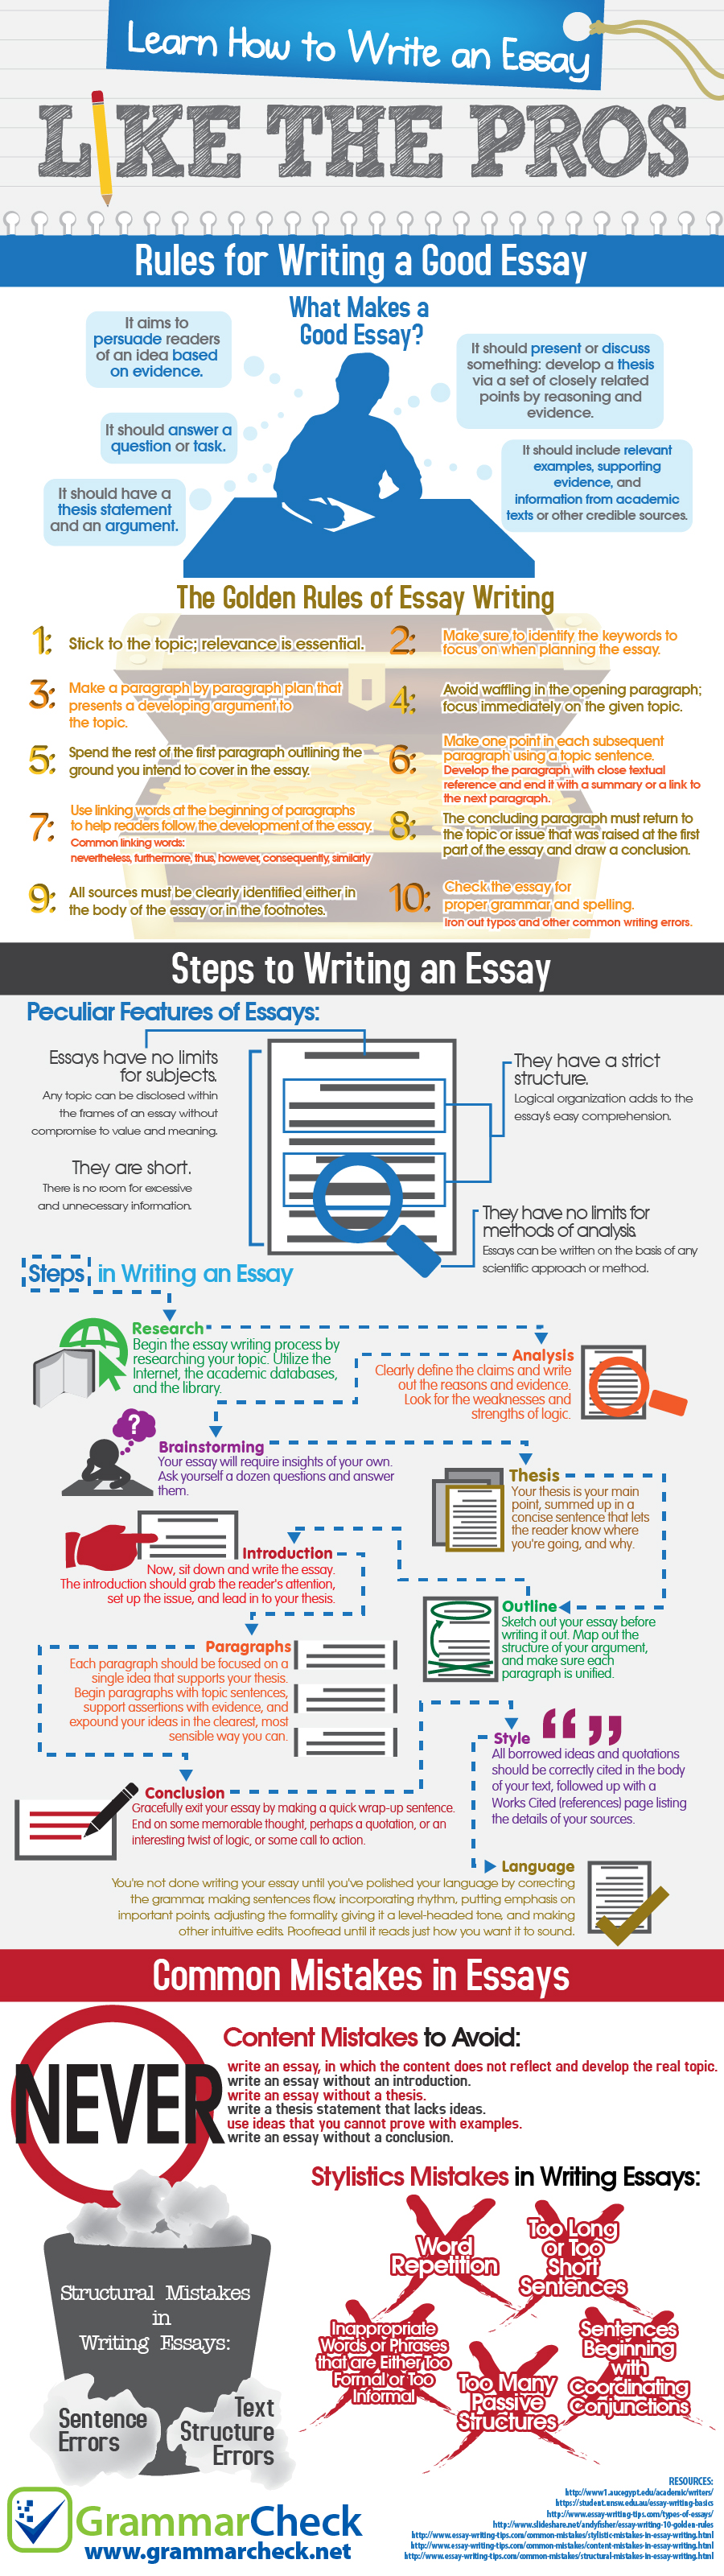 How to Write an Essay Like the Pros (Infographic)